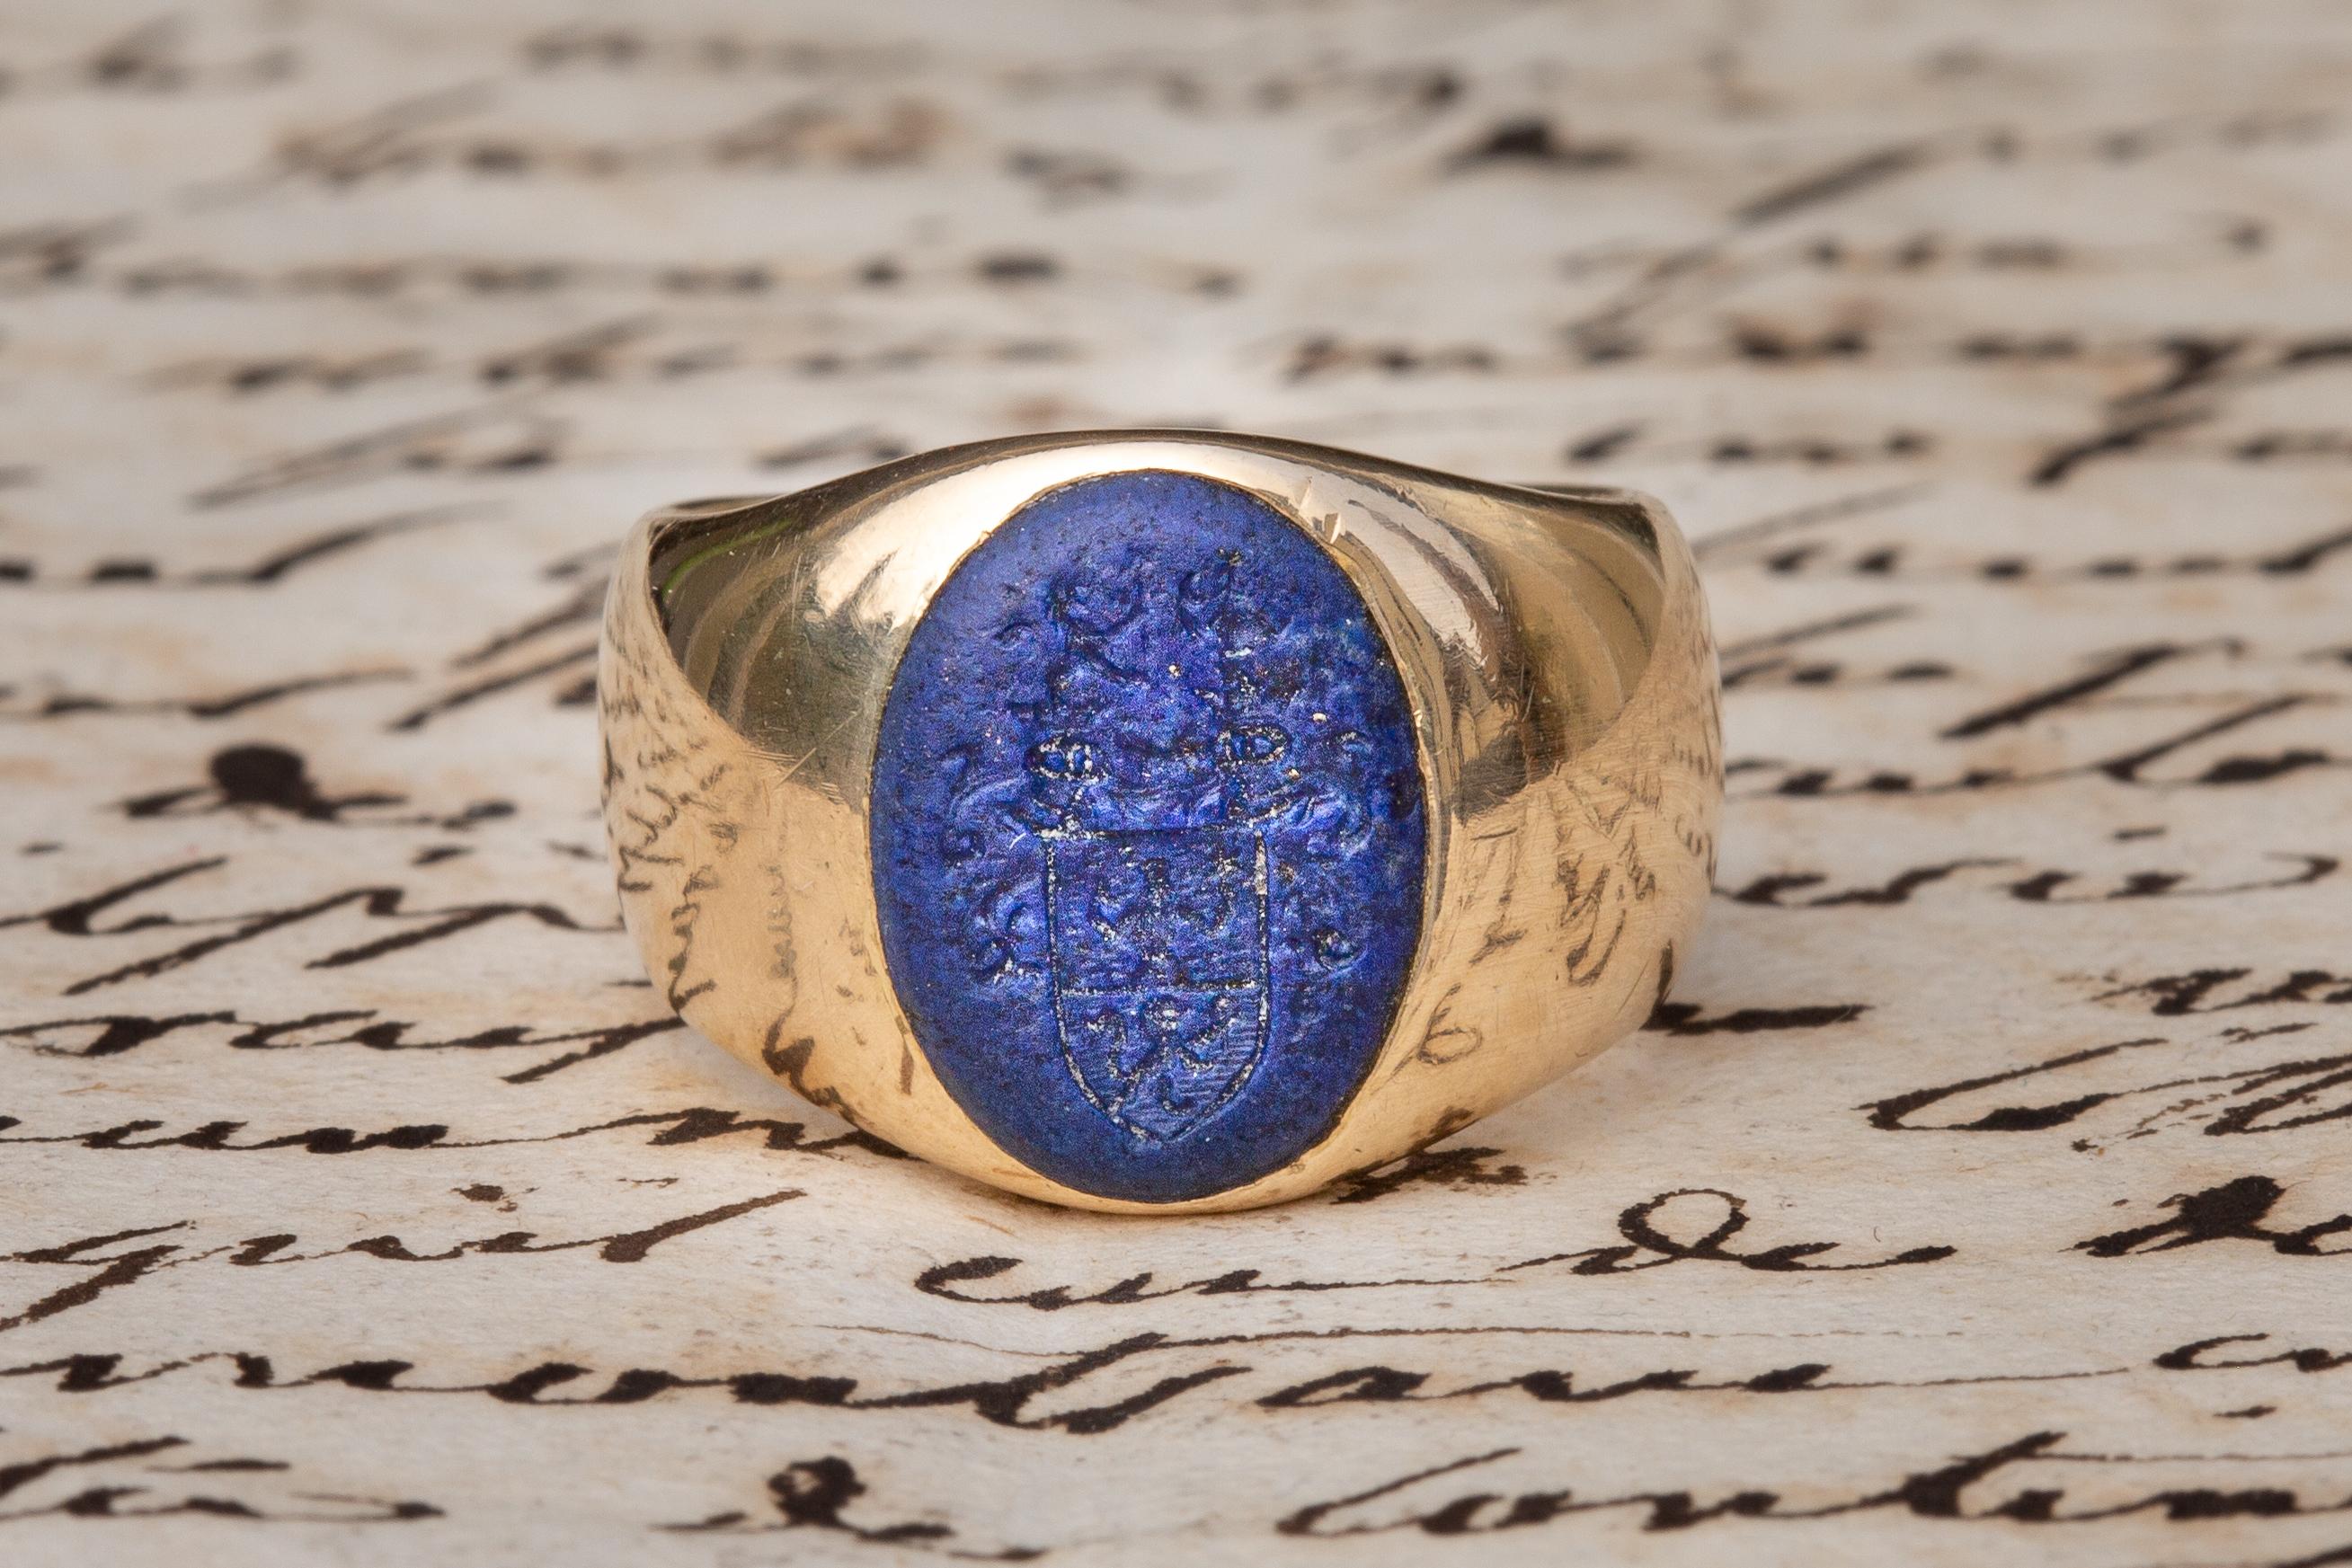 This fantastic heavy gold signet ring dates to the 1880's and was made in Austria. A vibrant lapis lazuli is engraved with a heraldic Romanian family coat of arms. These arms belong to the Ritter von Tabora family, Romanian nobles from Bukovina